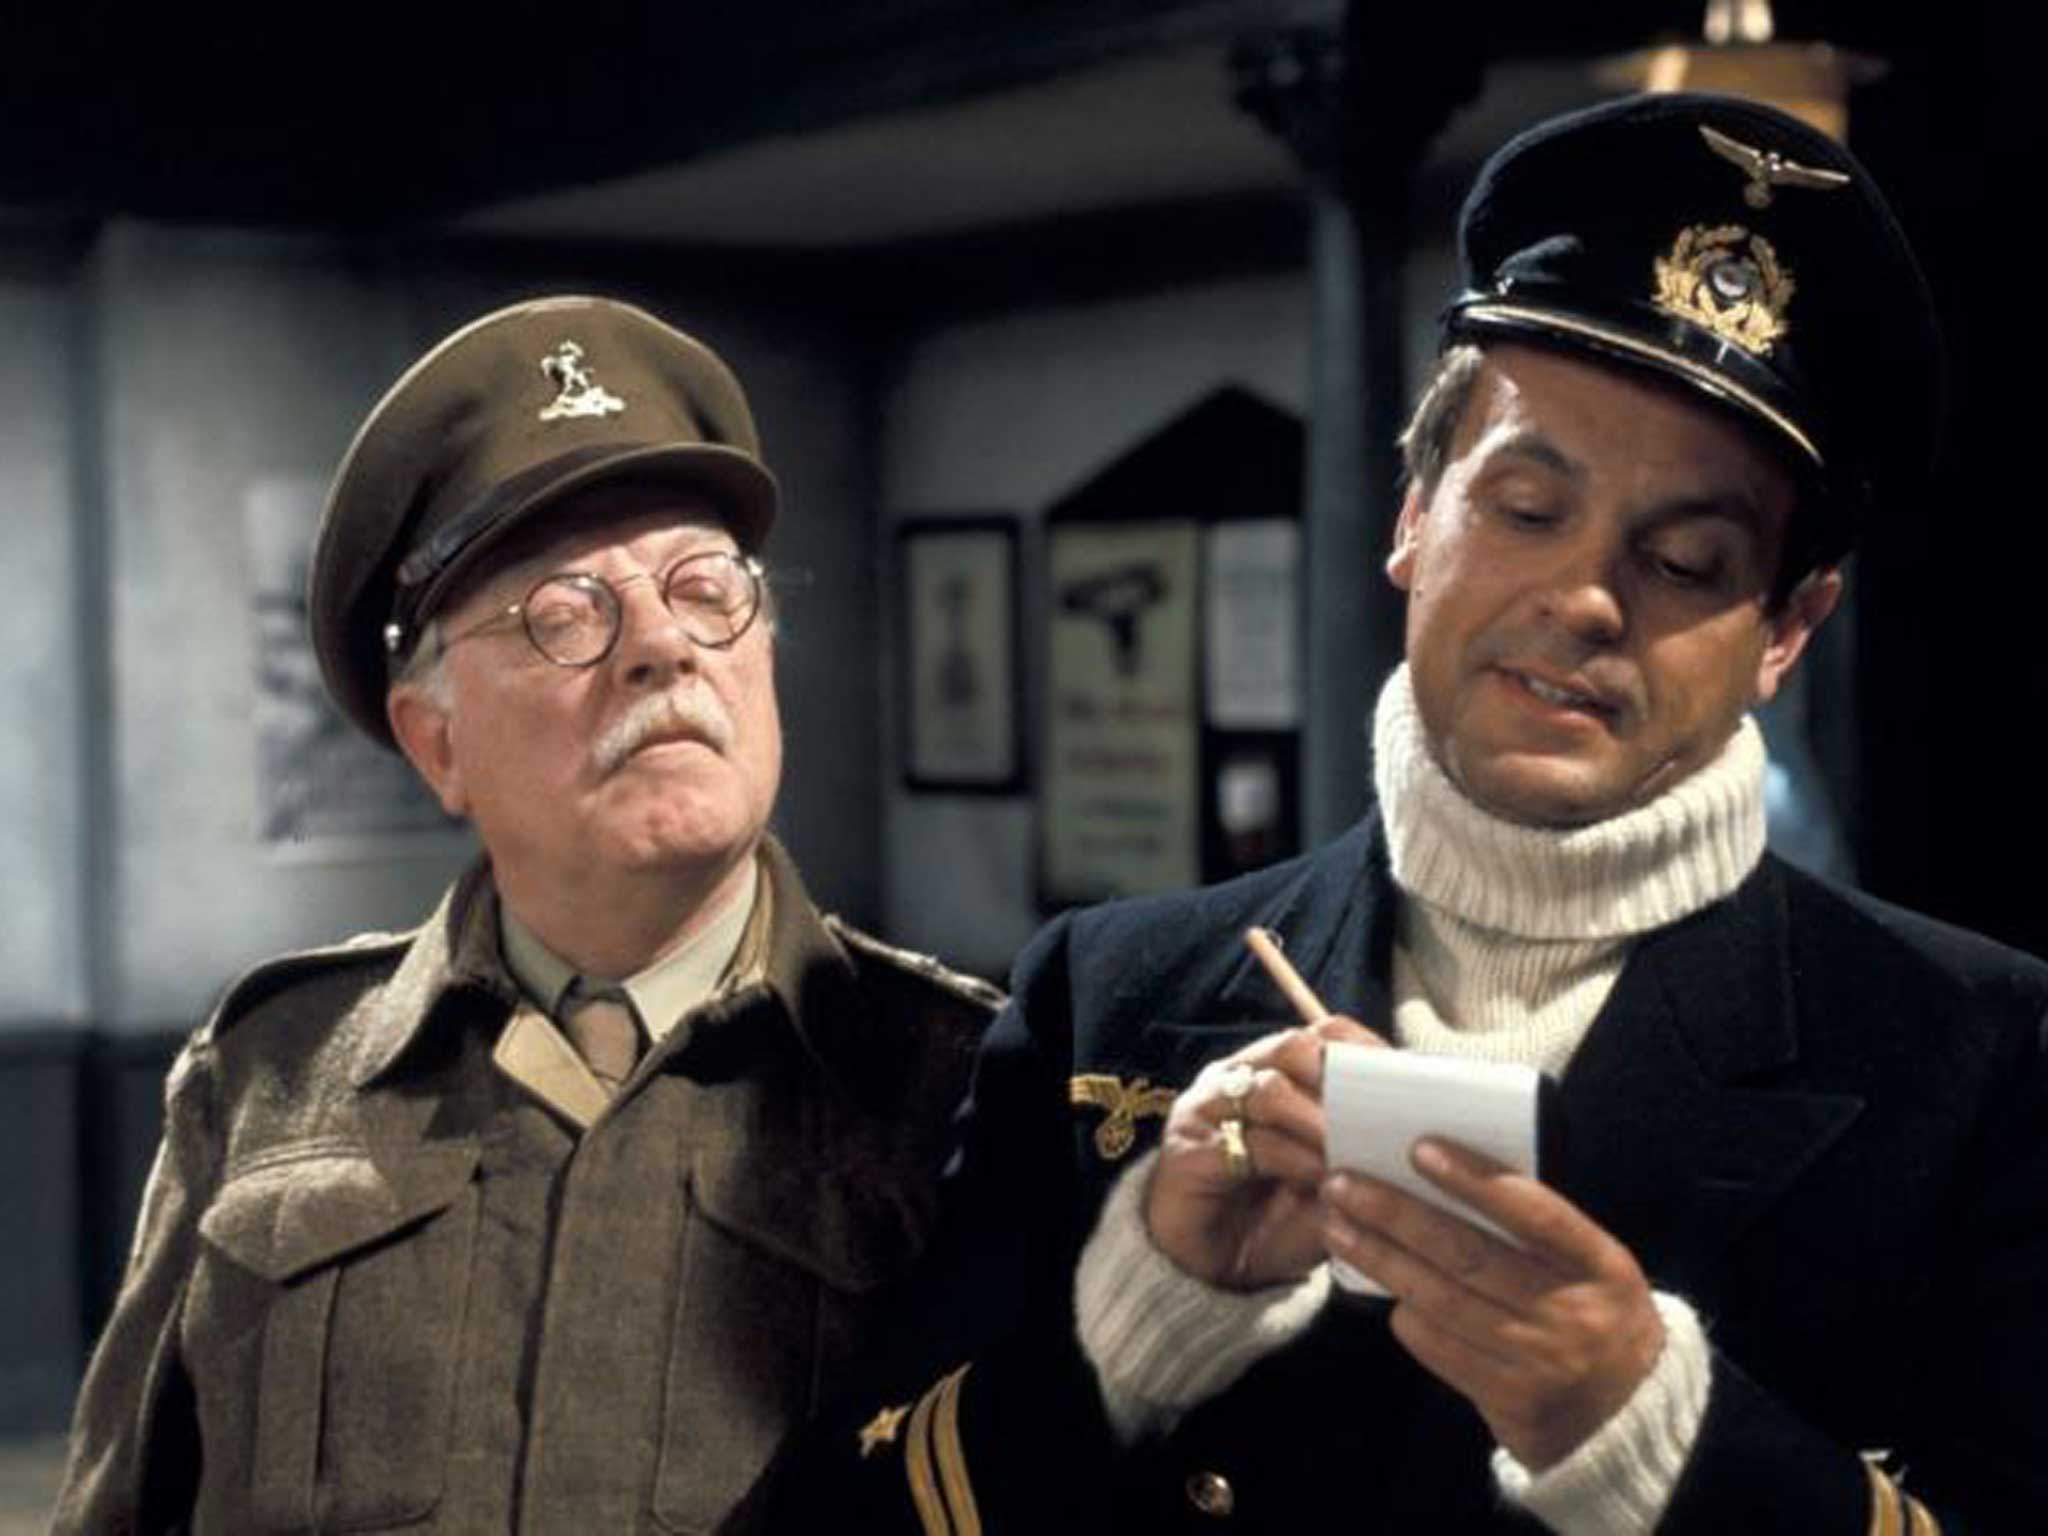 What originals? Arthur Lowe, as Captain Mainwaring from Dad’s Army in 1973